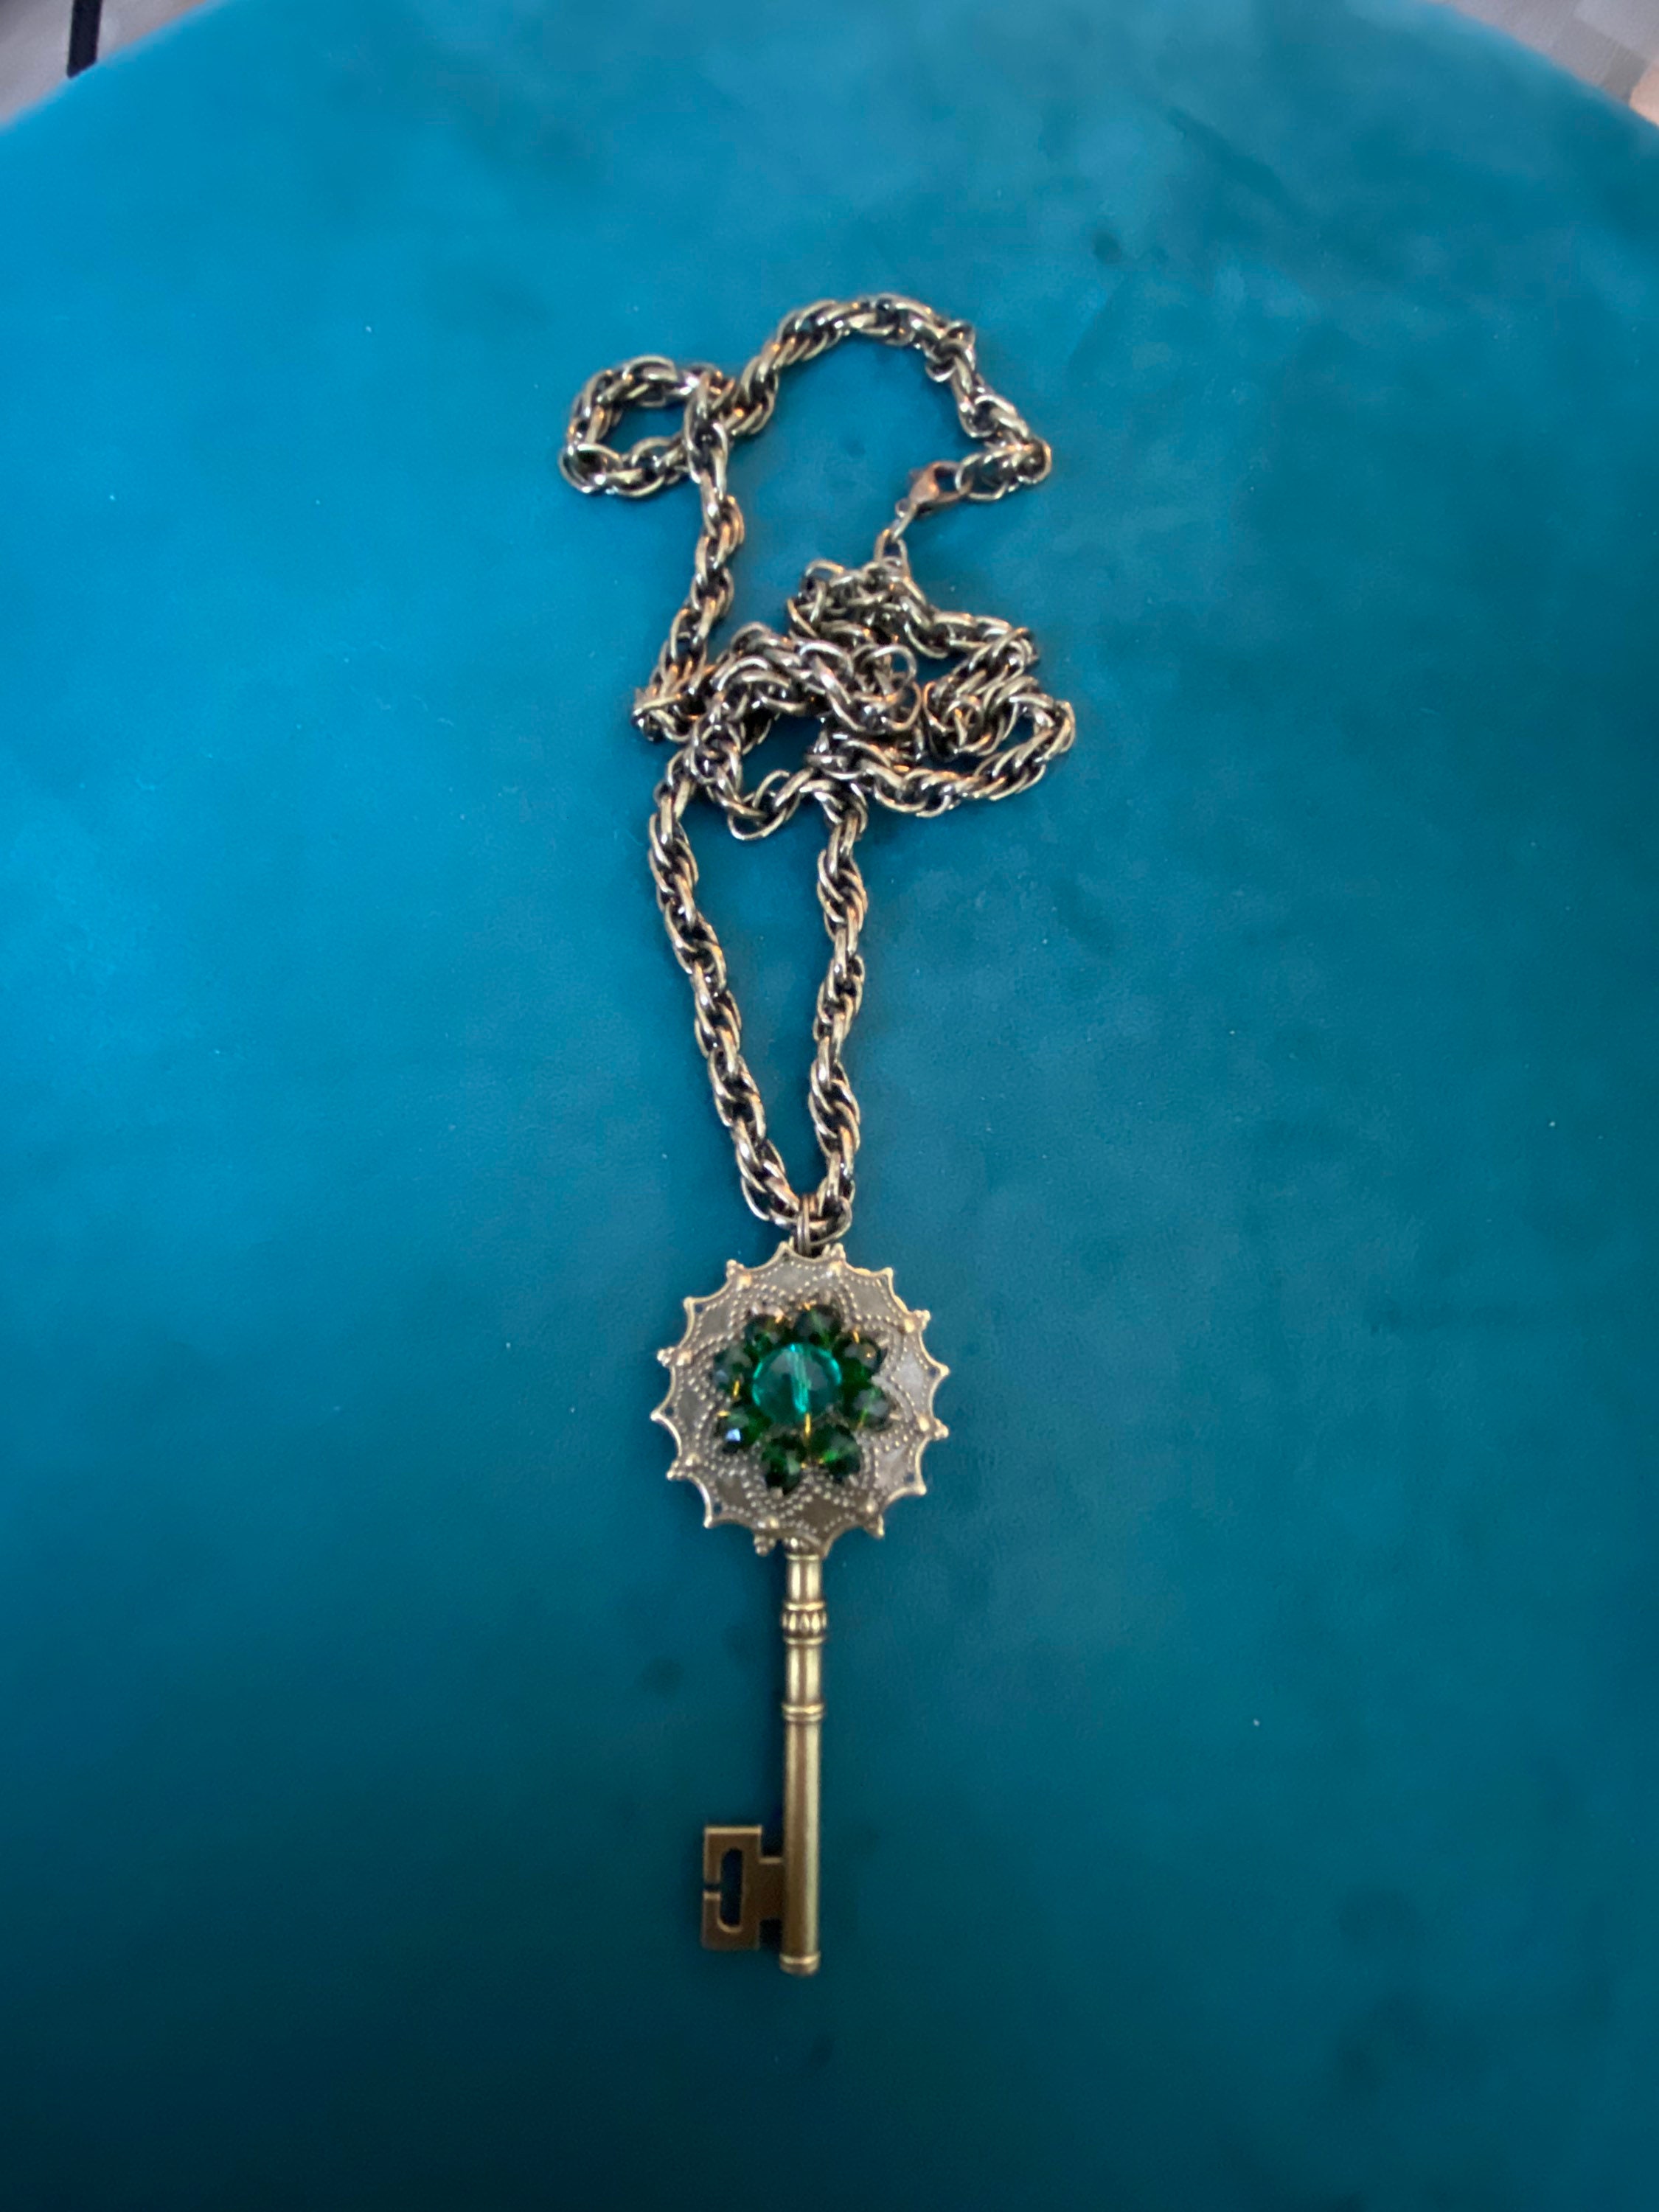 Mayfair Witches Inspired Key Necklace Made With Emerald Swarovski Crystals,  Gothic Key, Witchy Jewelry, Unique Fantasy Jewelry Gift - Etsy Denmark